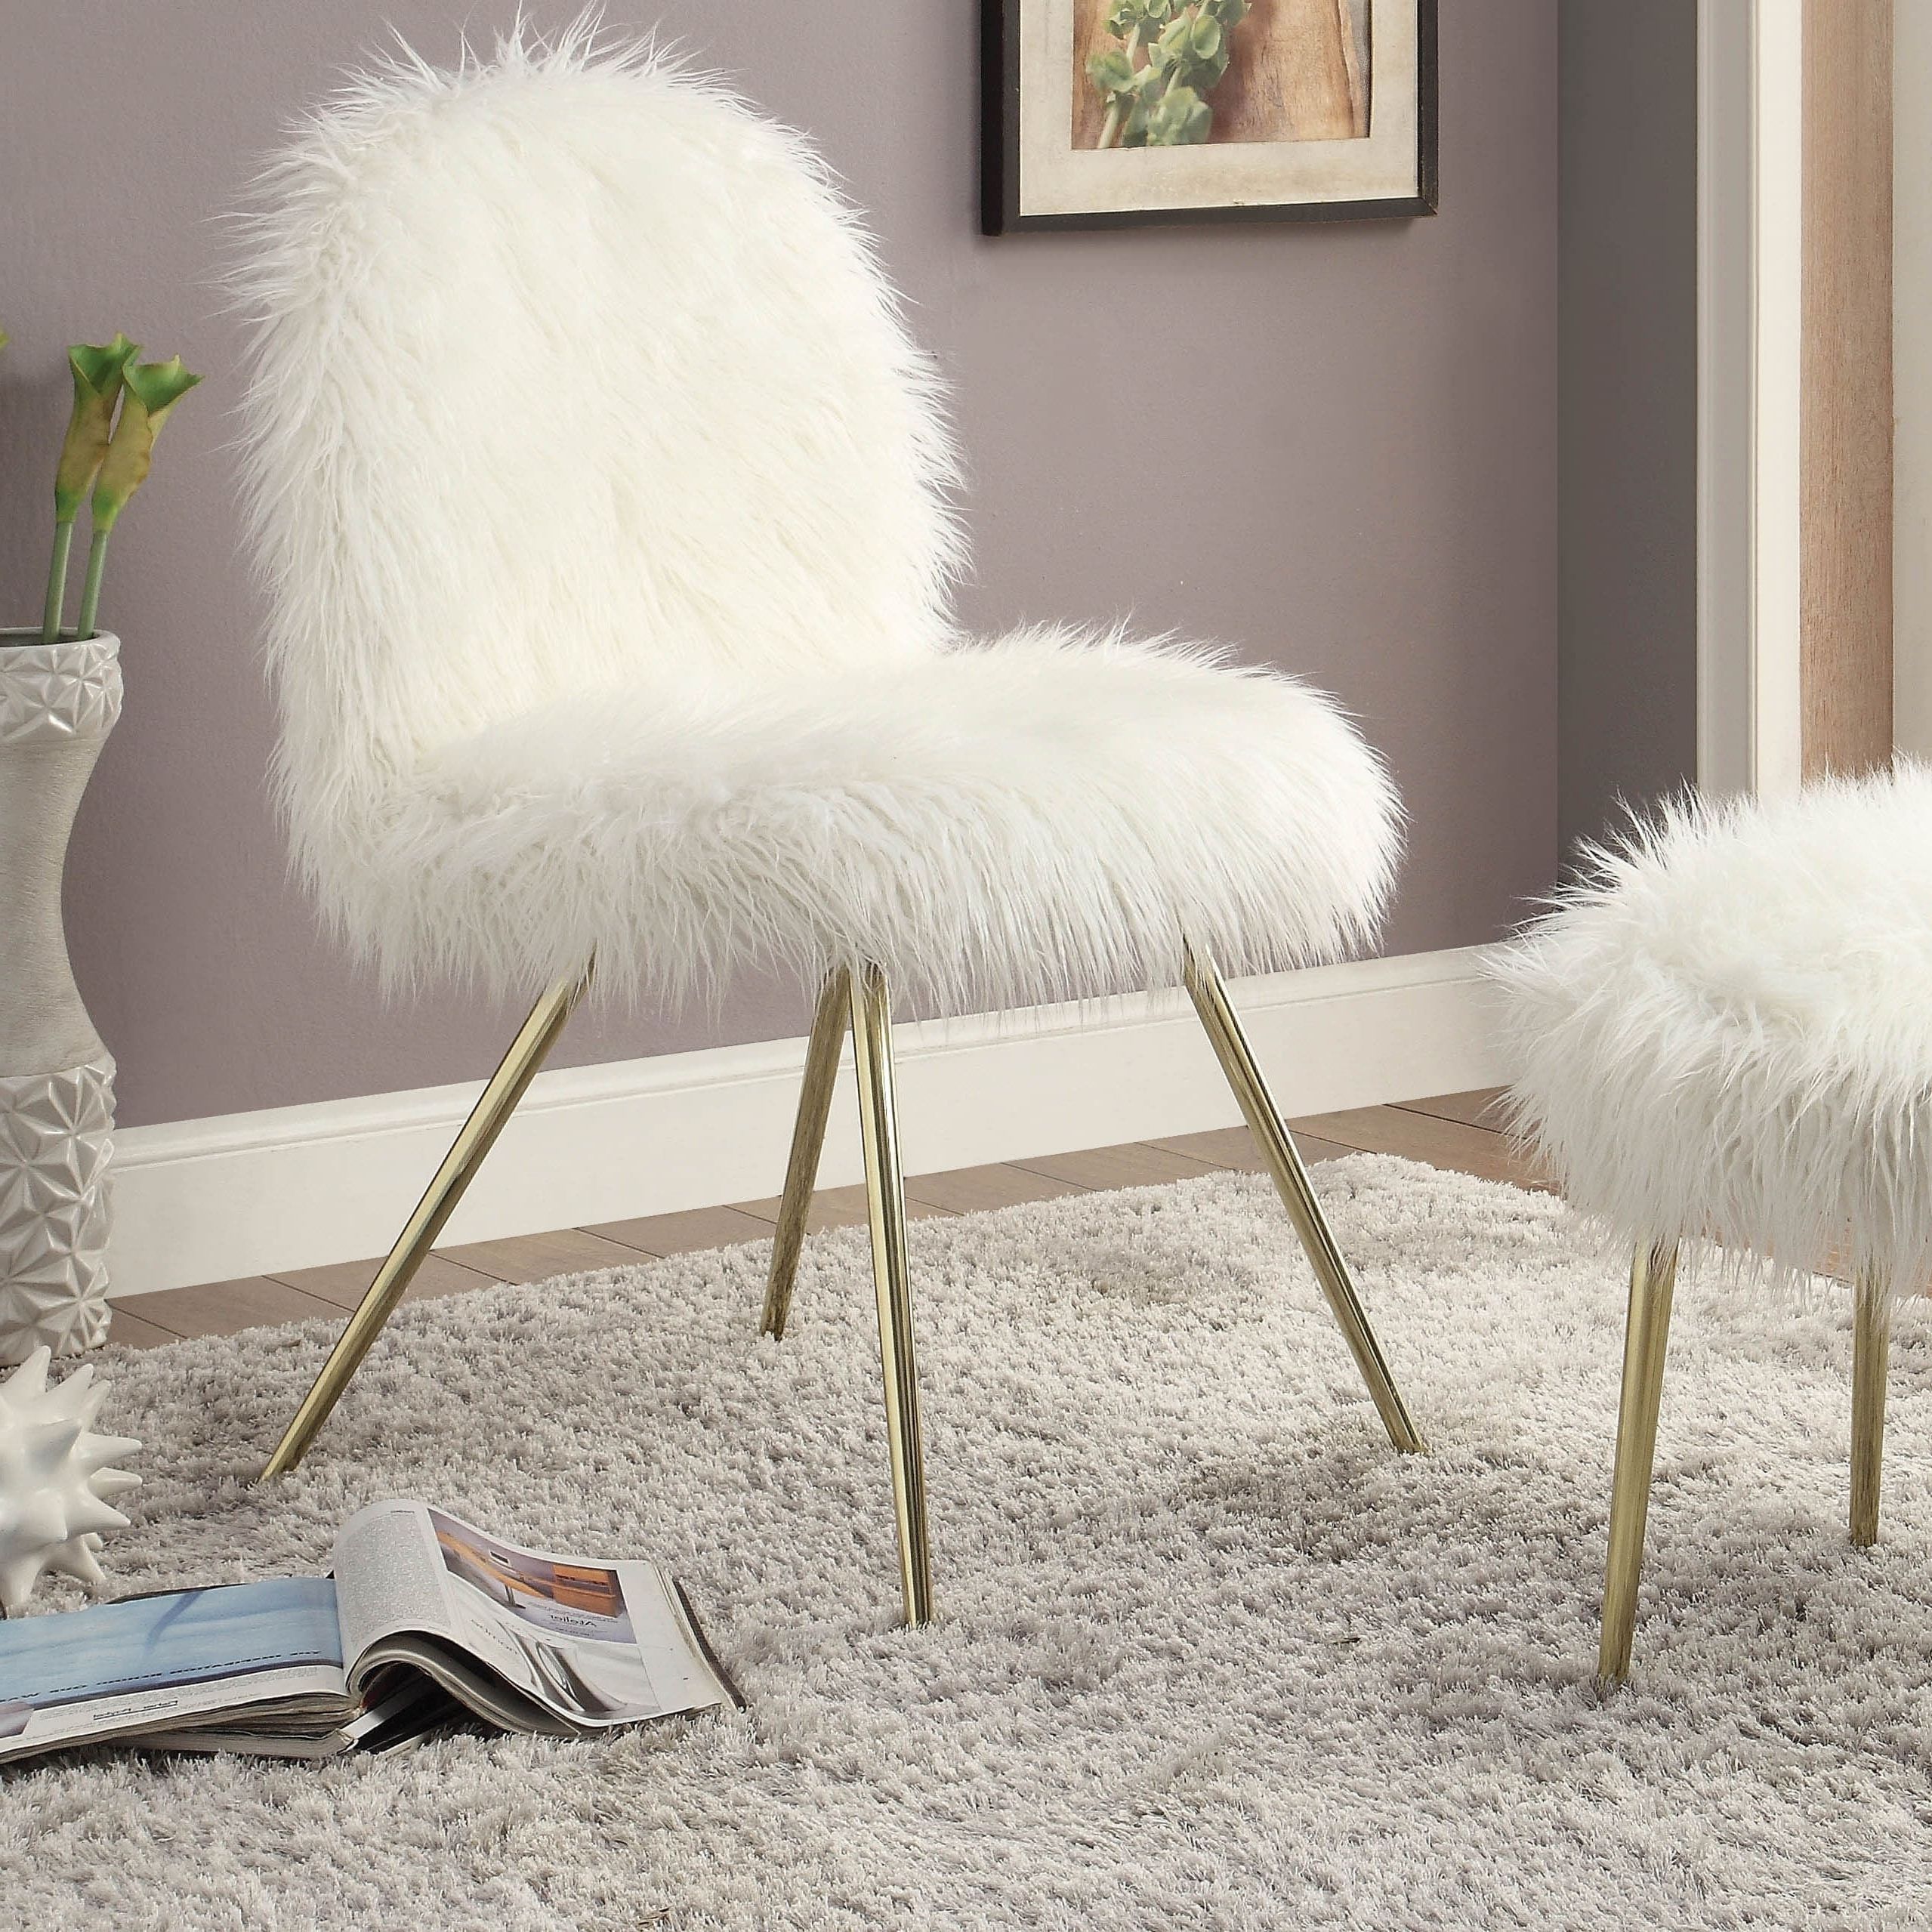 Lack Faux Fur Round Accent Stools With Storage For Most Recent White Fluffy Chair (View 6 of 10)